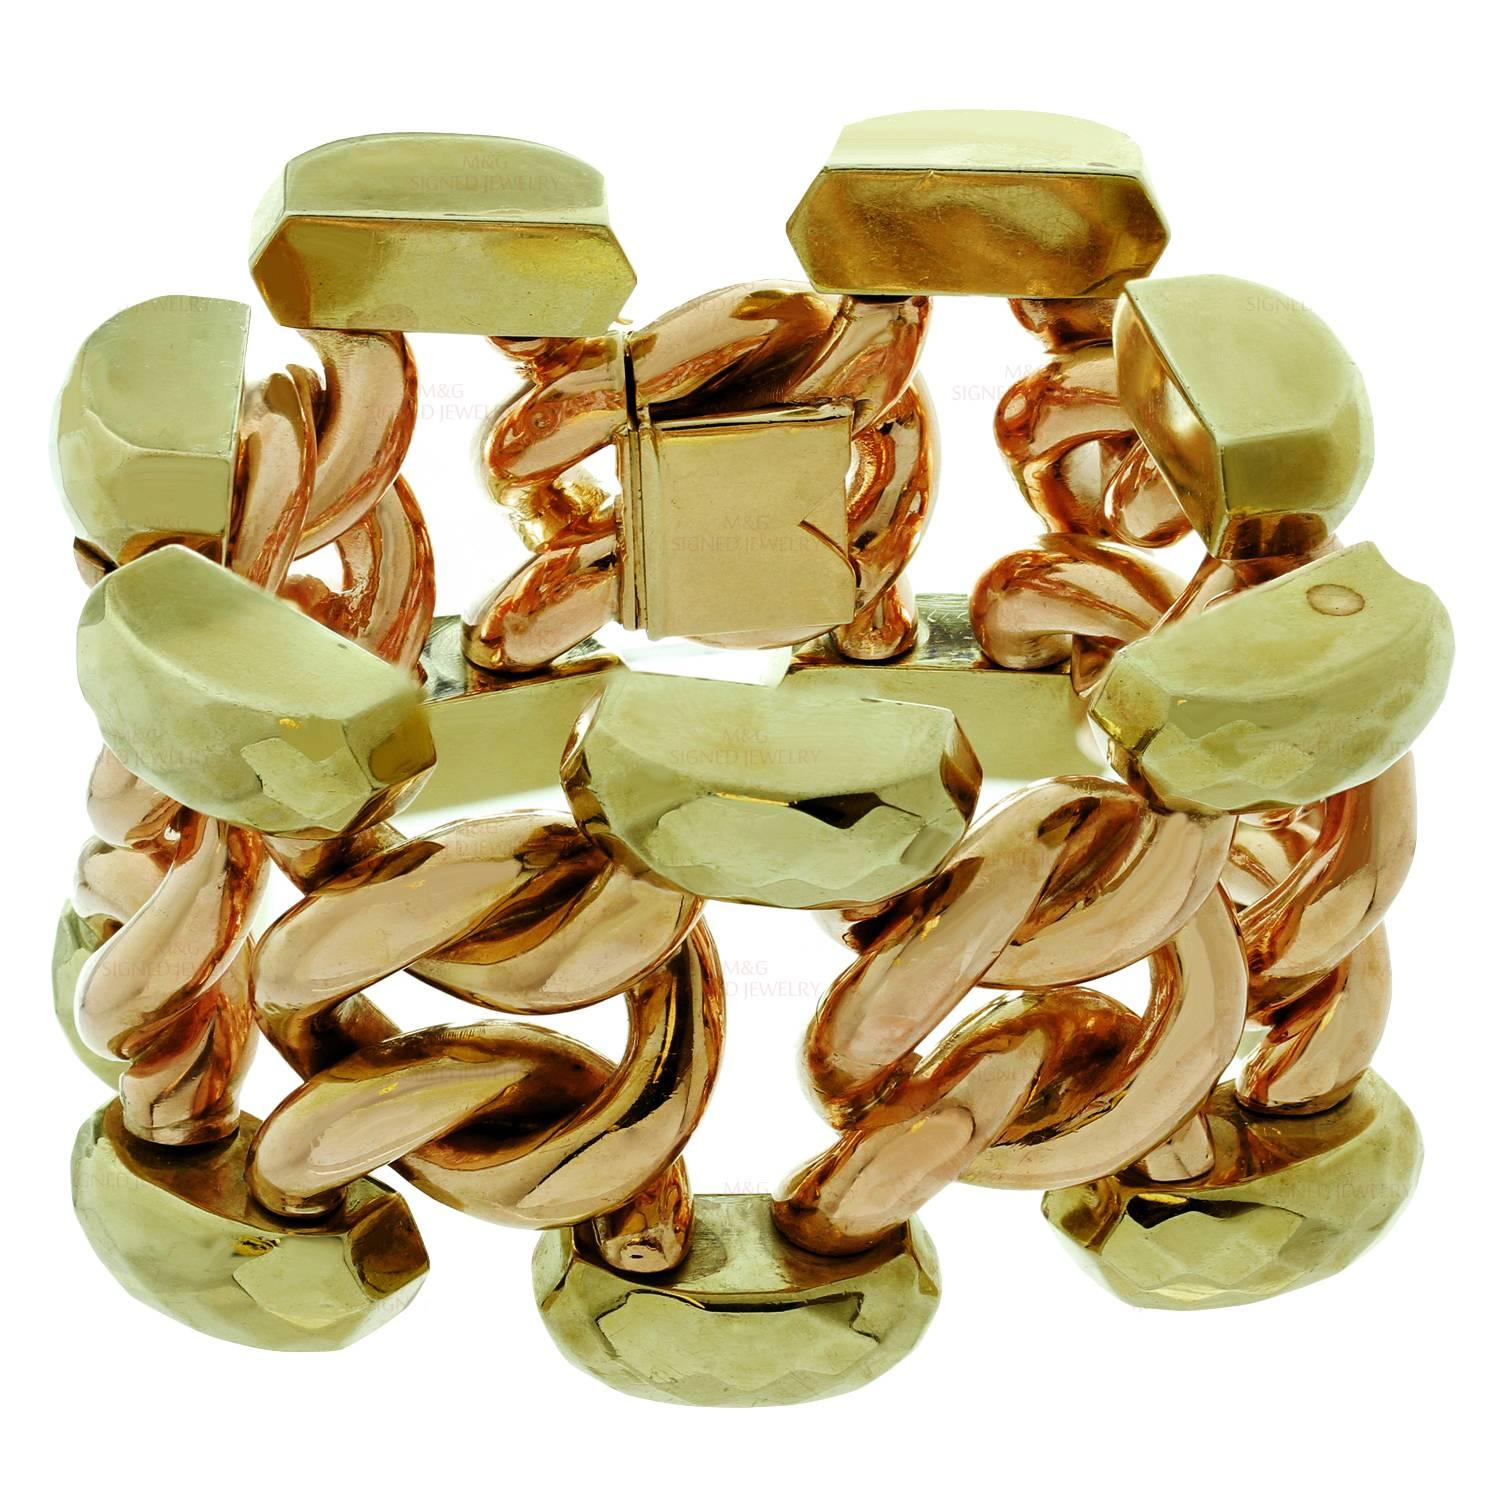 This magnificent large retro link bracelet is crafted in 18k yellow and rose gold. Made in United States circa 1940s. Total Gold weight 106gr. We do not polish antique items, but we can add a high polish upon buyer's request at no extra charge.